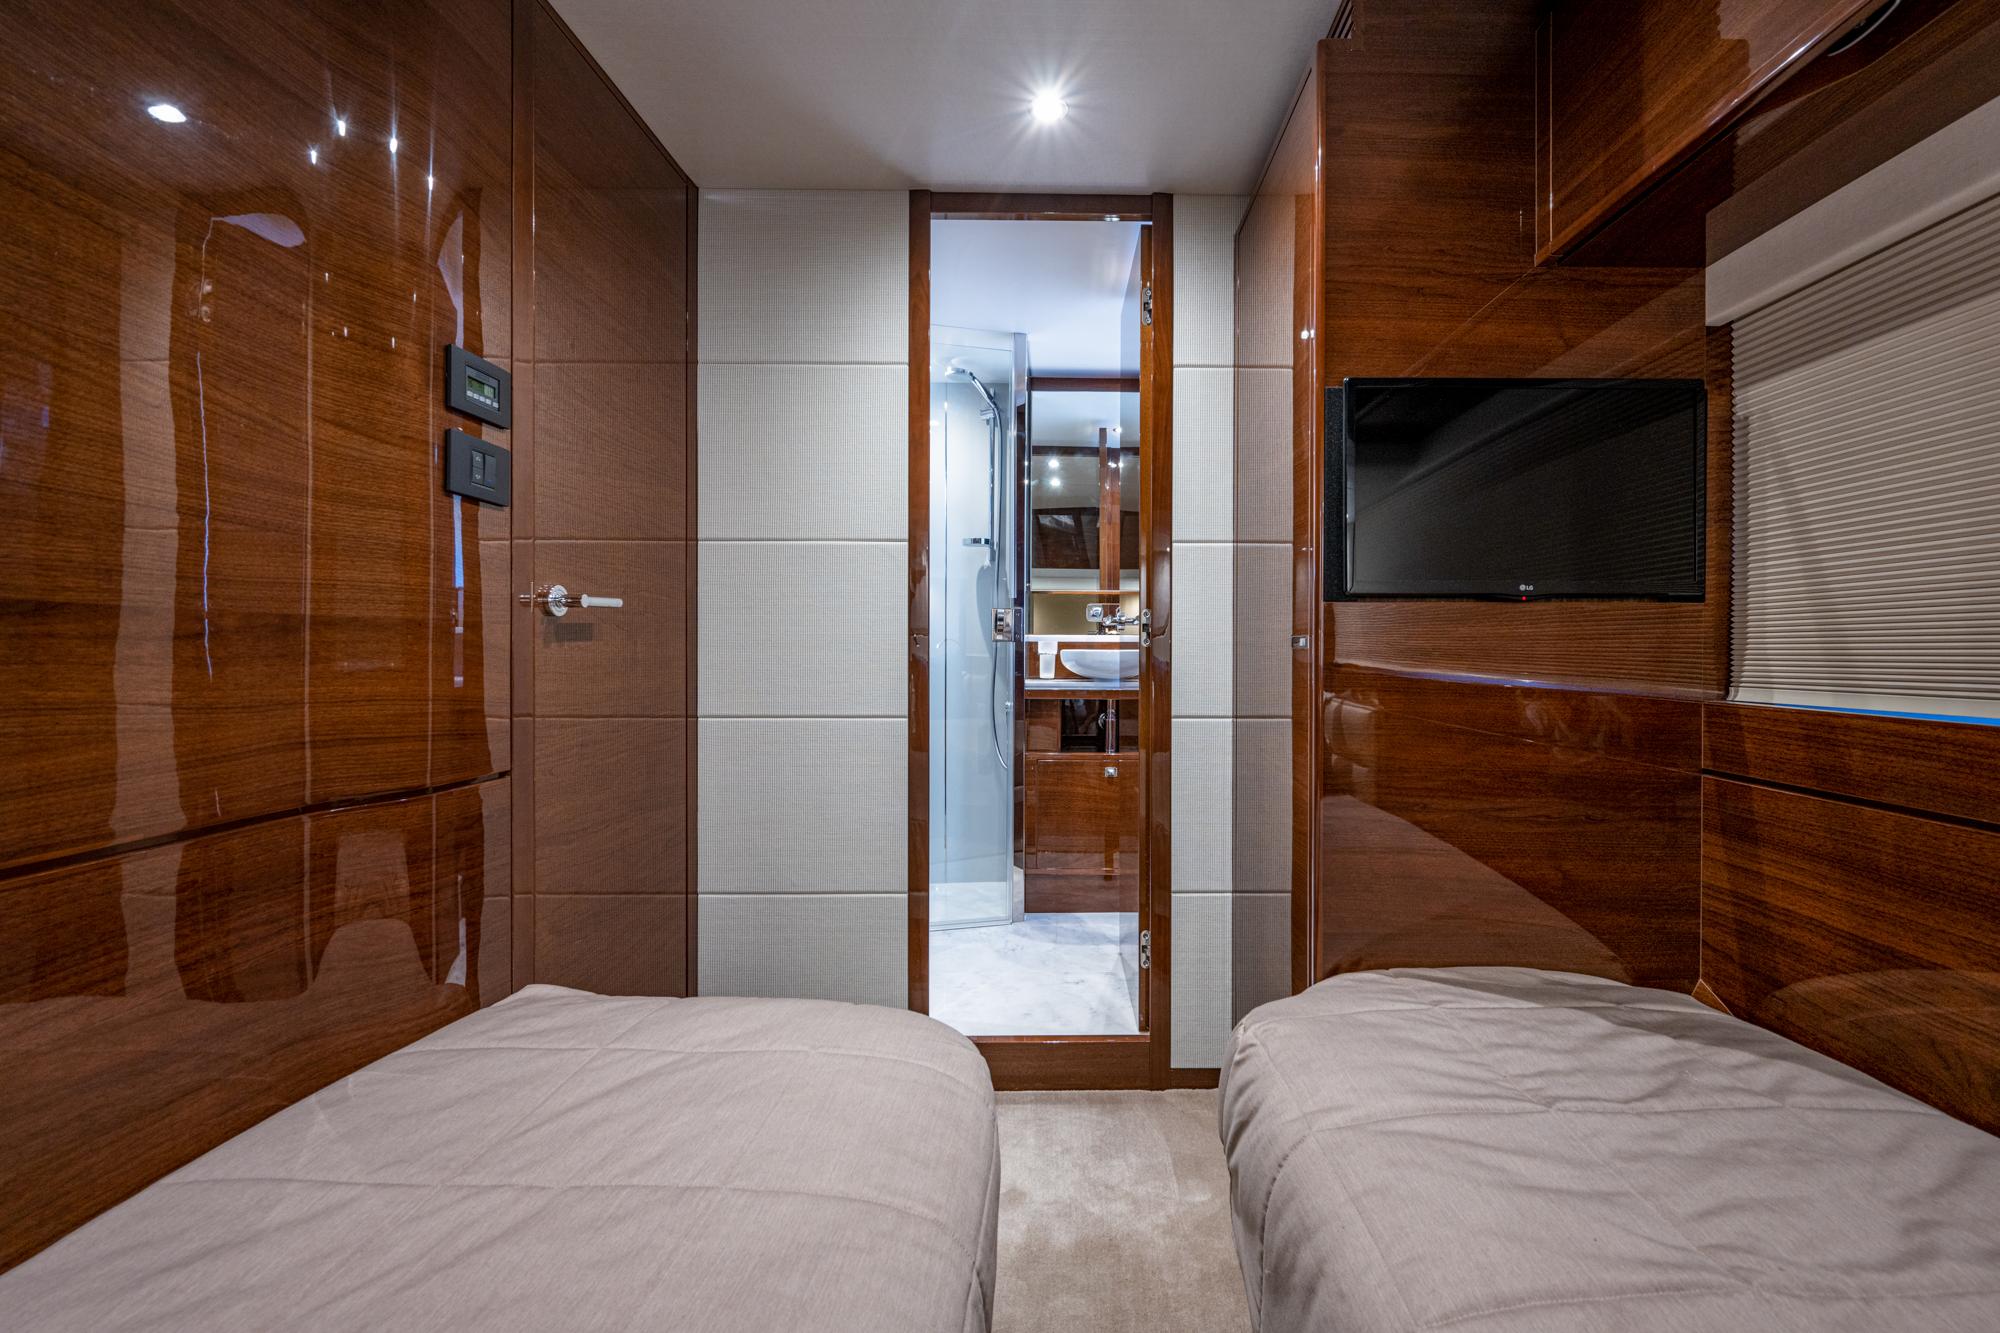 Princess 70 I Love It -Entryway to Guest Stateroom, Side by Side Berths with TV